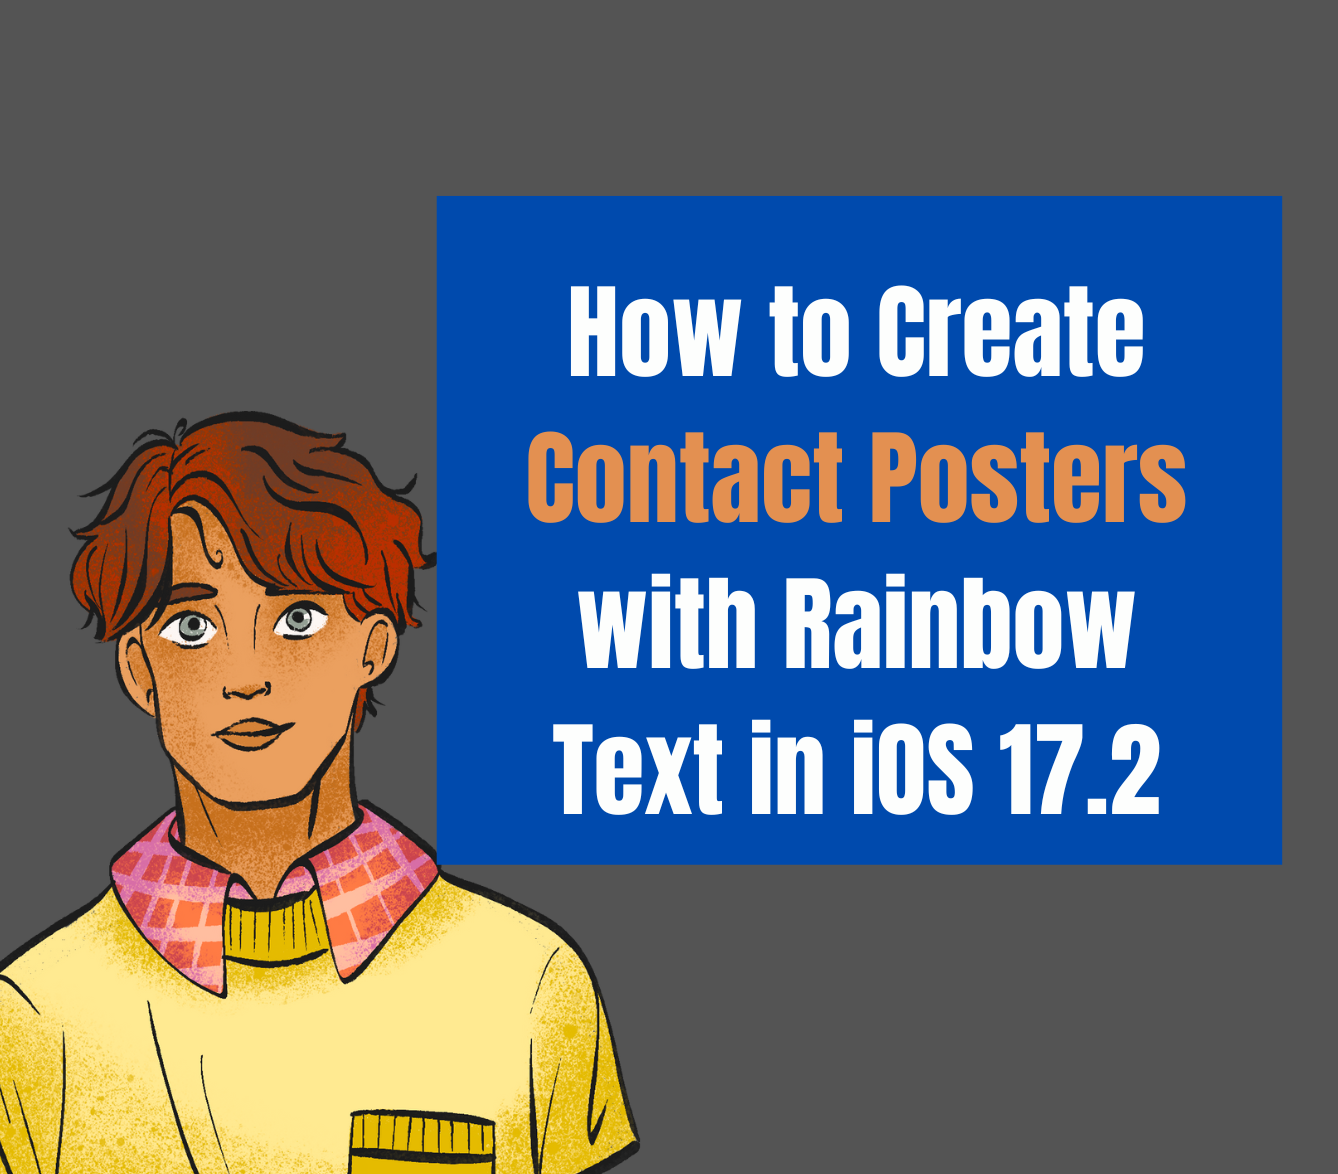 How to Create Contact Posters with Rainbow Text in iOS 17.2